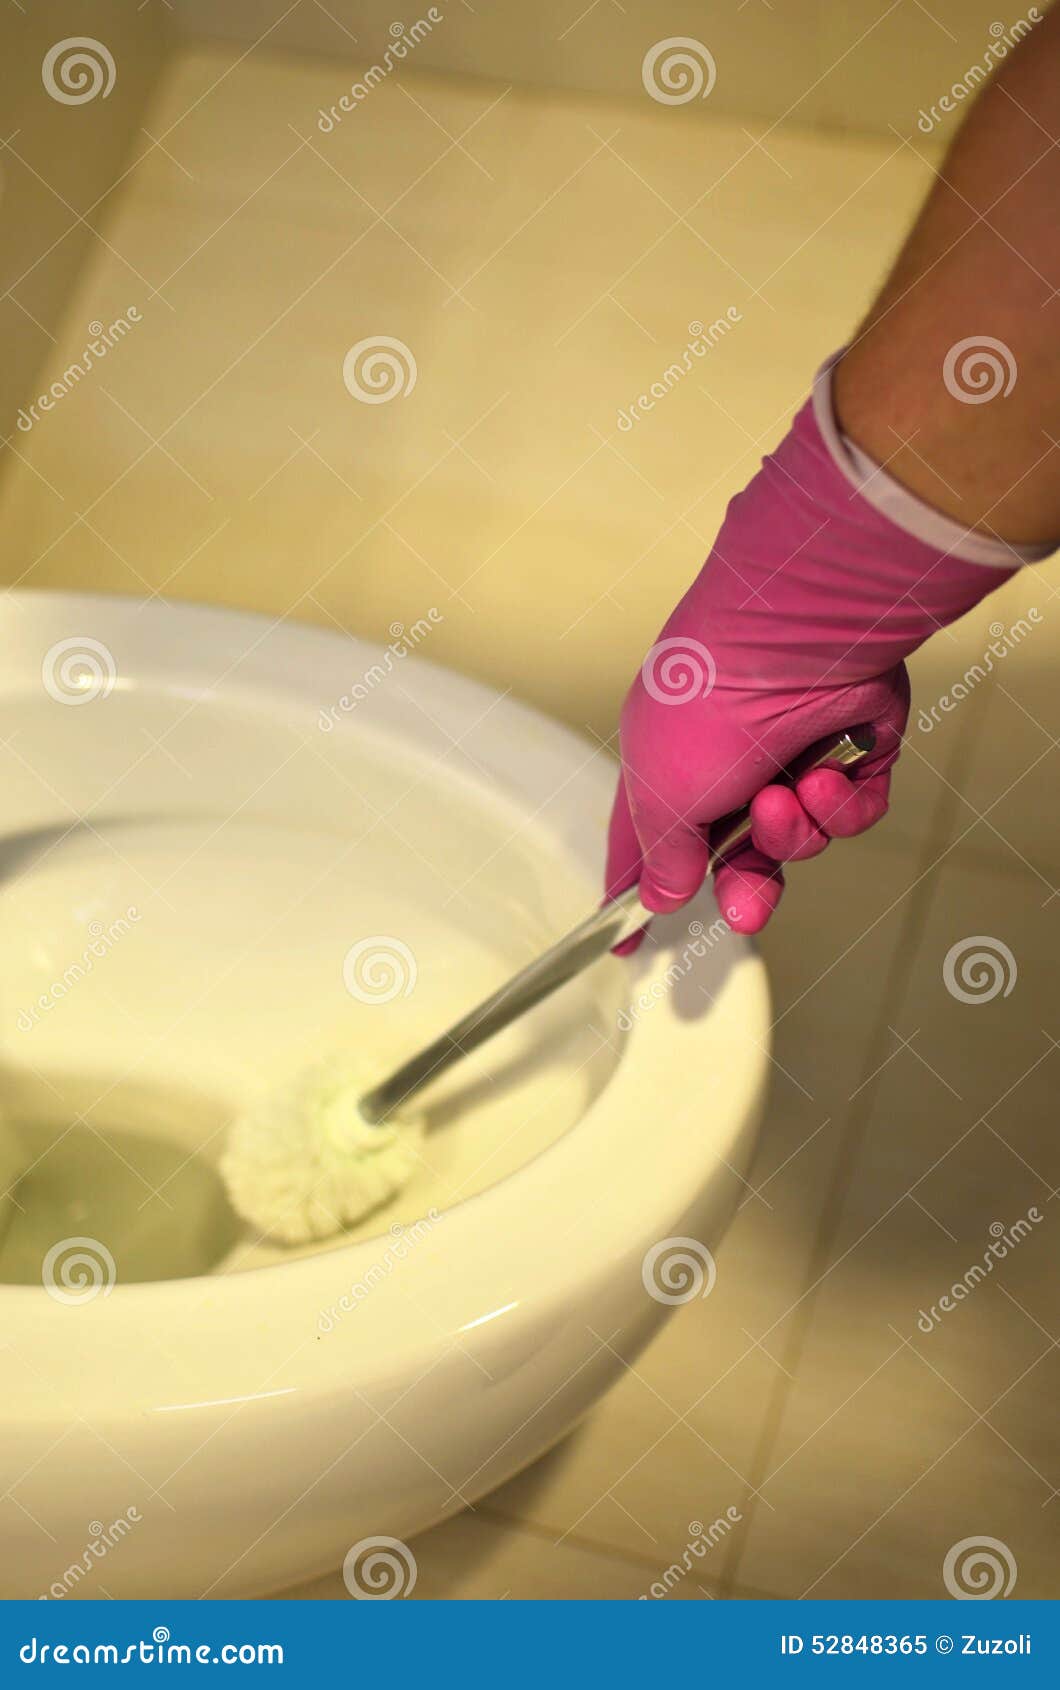 Wiping a toilet seat stock image. Image of household 